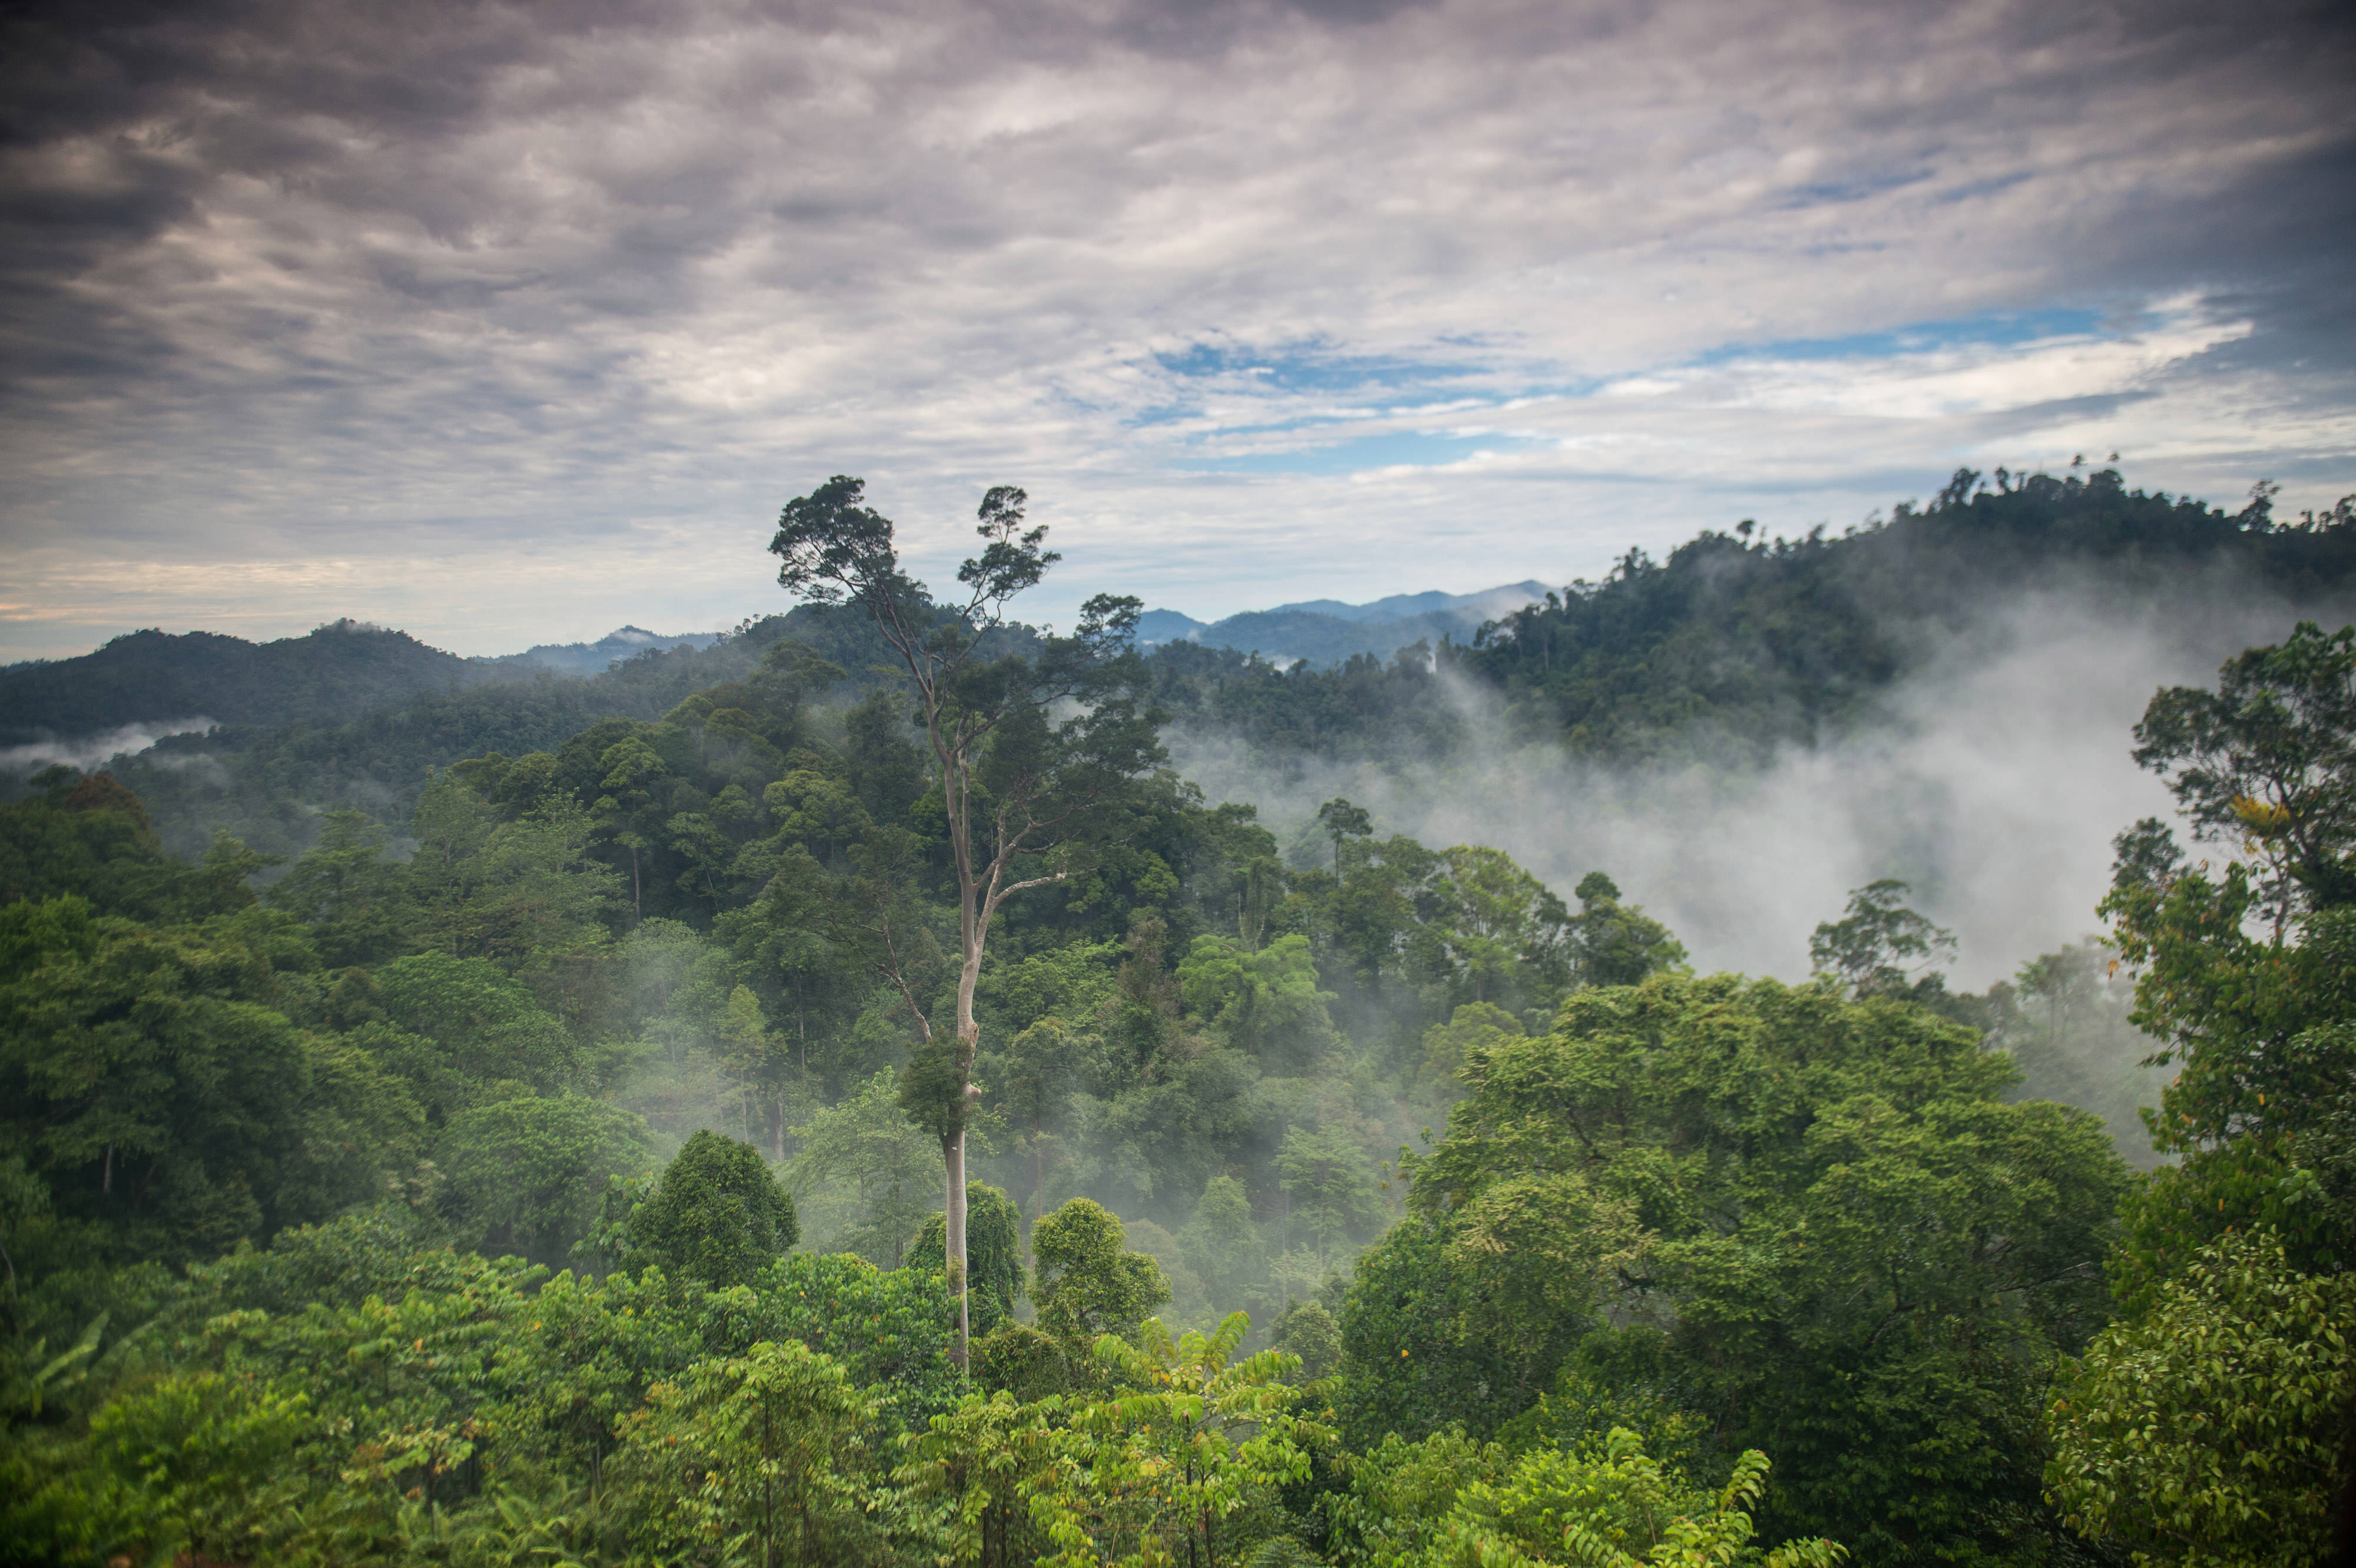 Water vapor and mist rise from tropical rainforest in Indonesia.